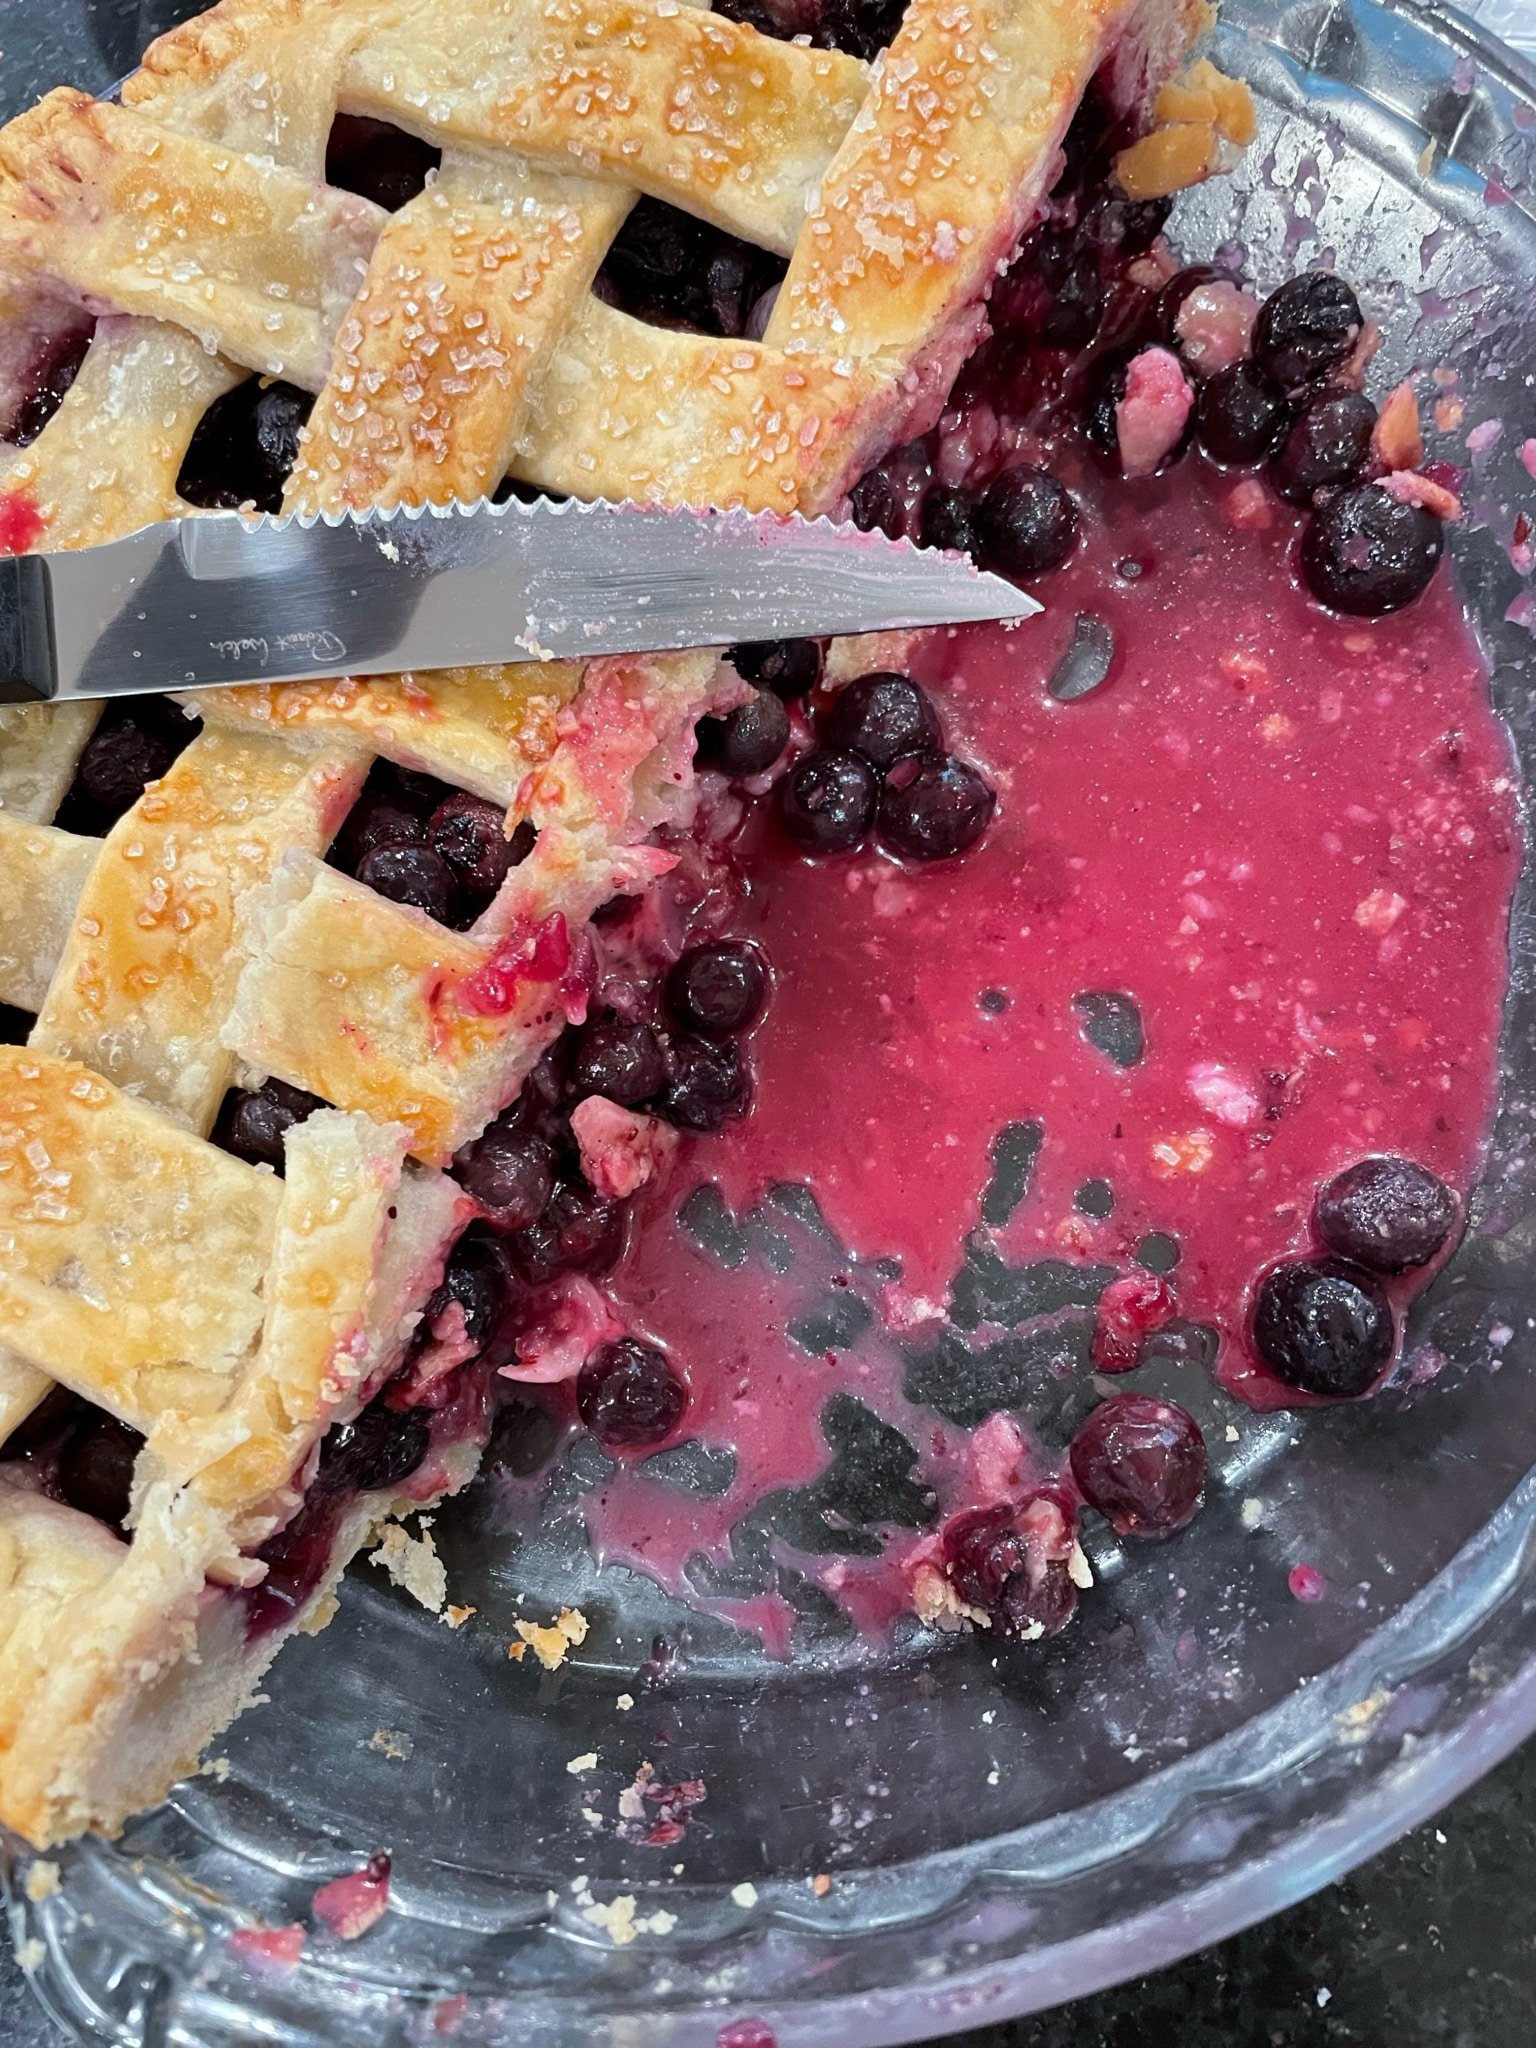 under-baked blueberry pie with raw-looking lattice dough and runny filling.